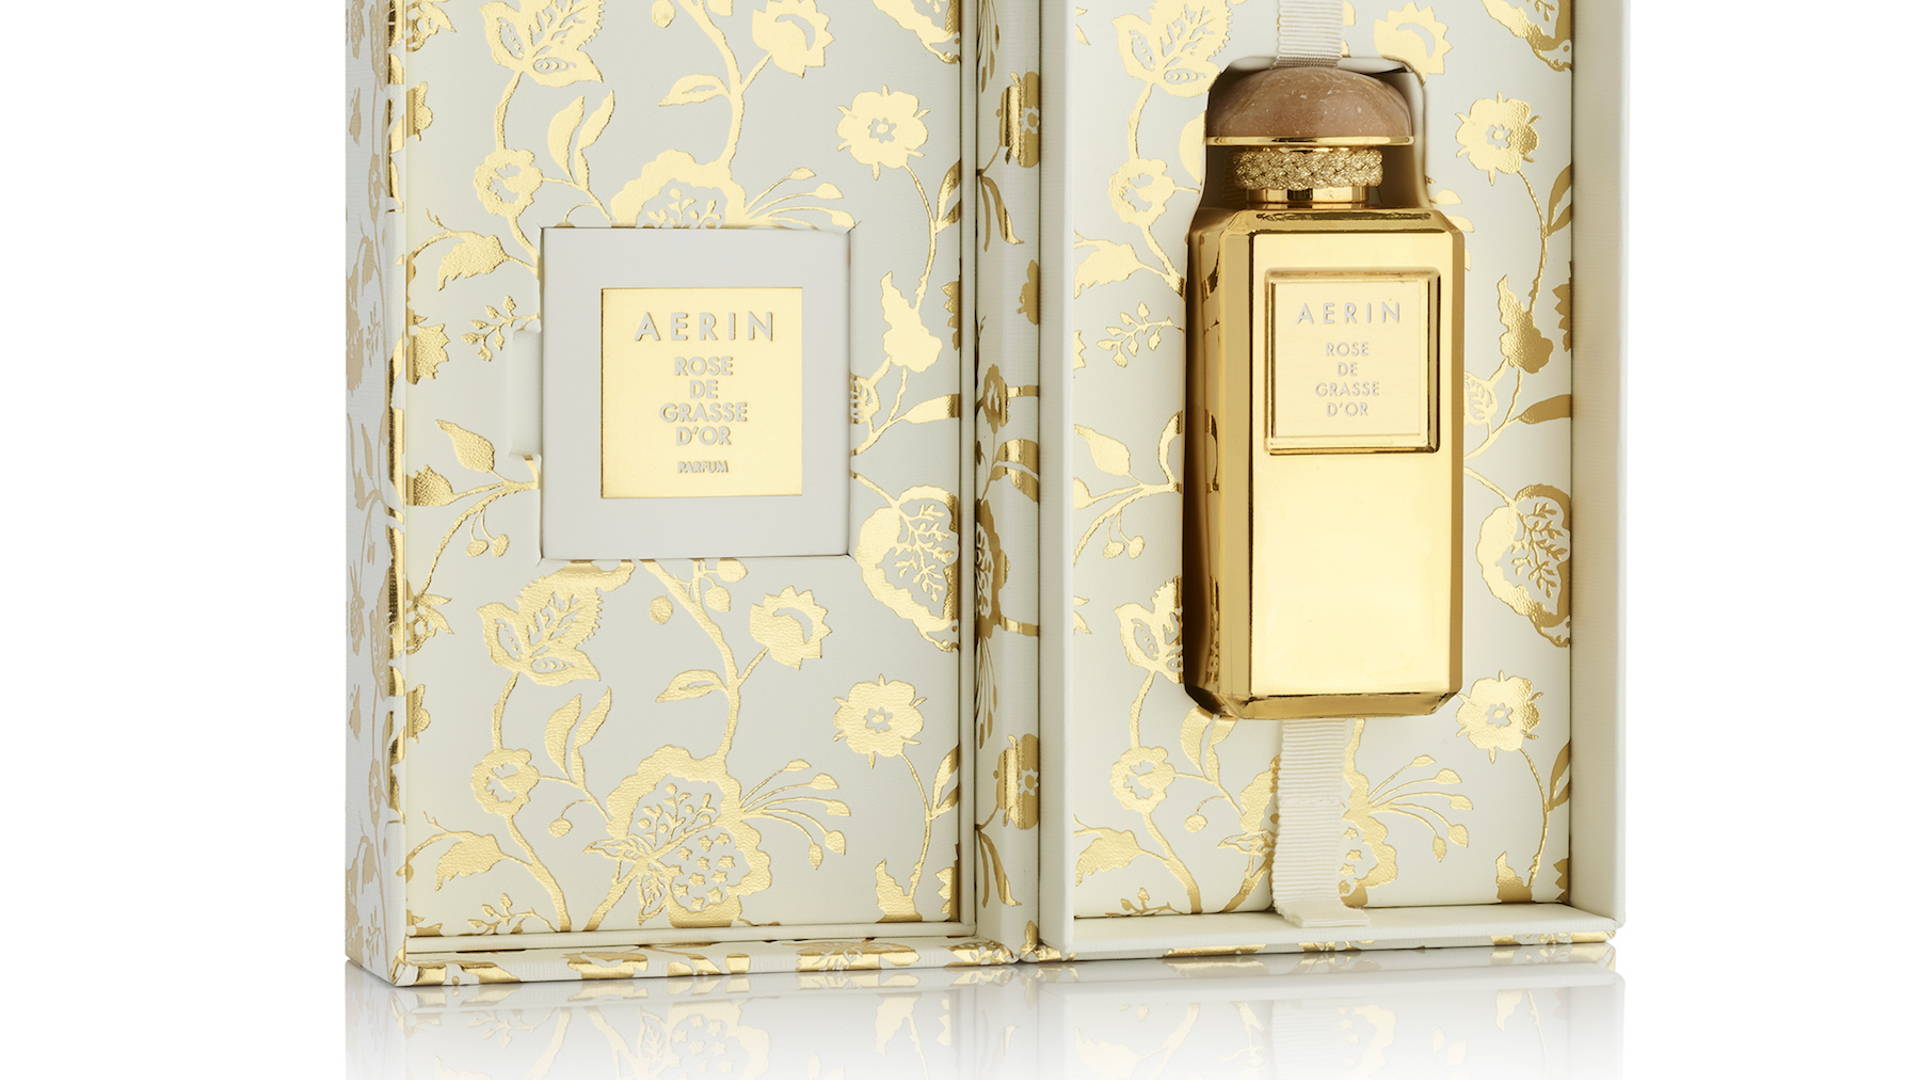 Featured image for Live Like Royalty with Aerin Rose de Glasse d’Or Fragrance